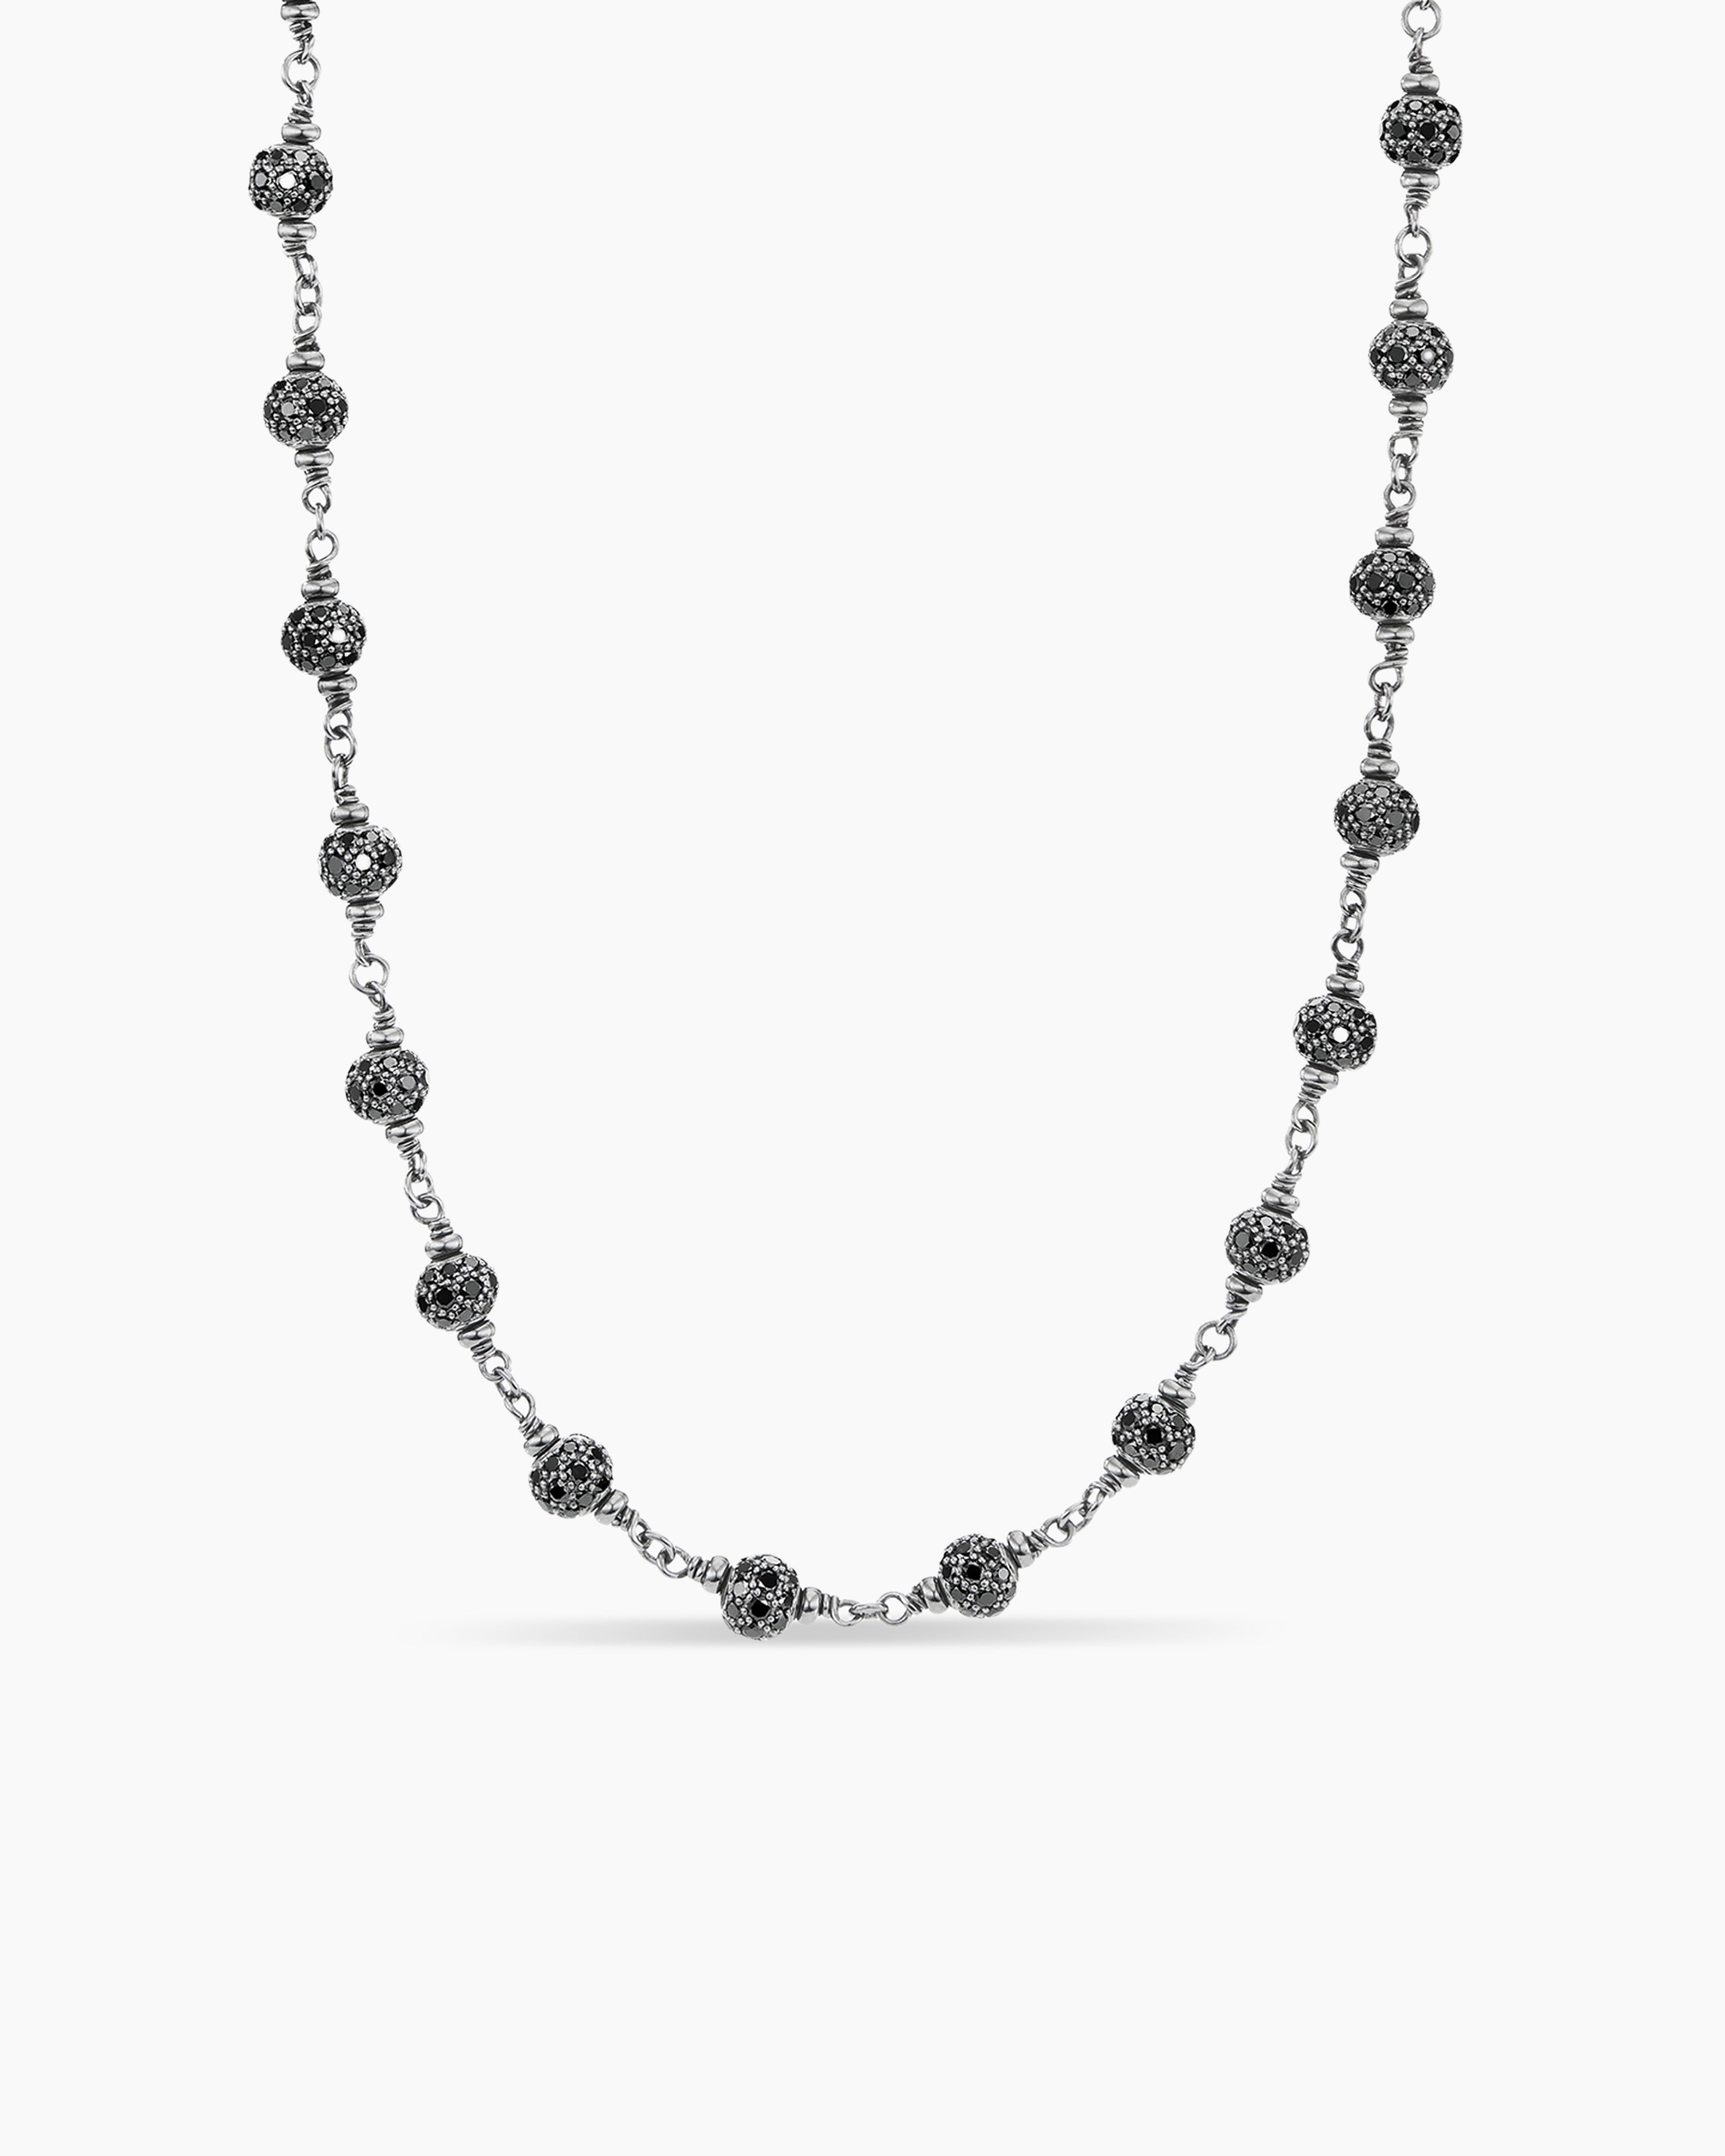 Black Oxidised Silver Necklace Set with Earrings for Womens\Girls